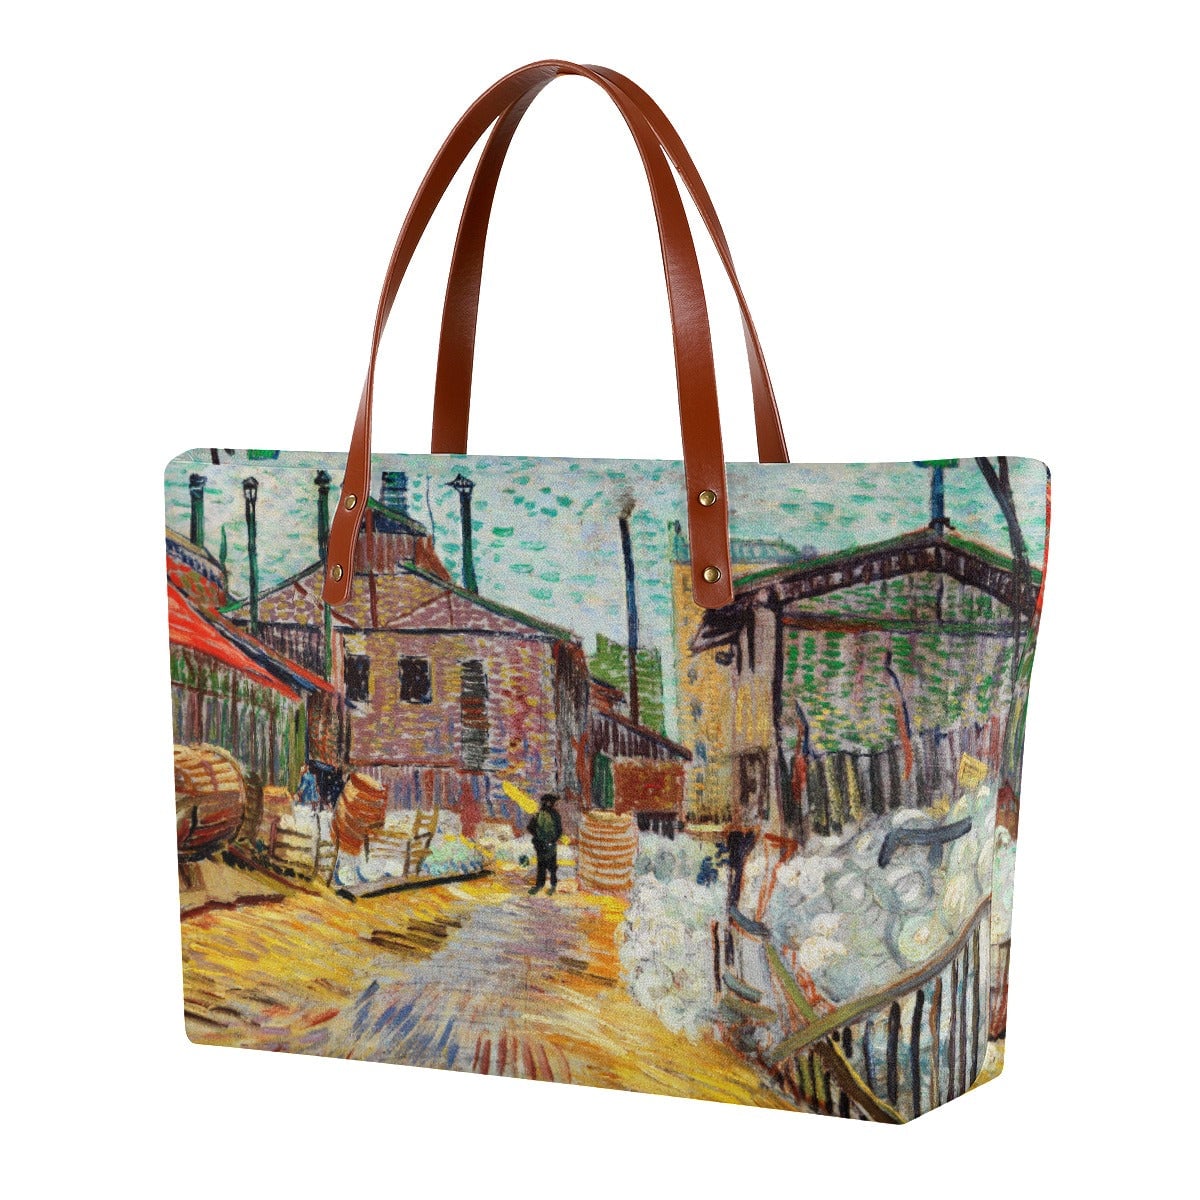 The Factory by Vincent Van Gogh Tote Bag